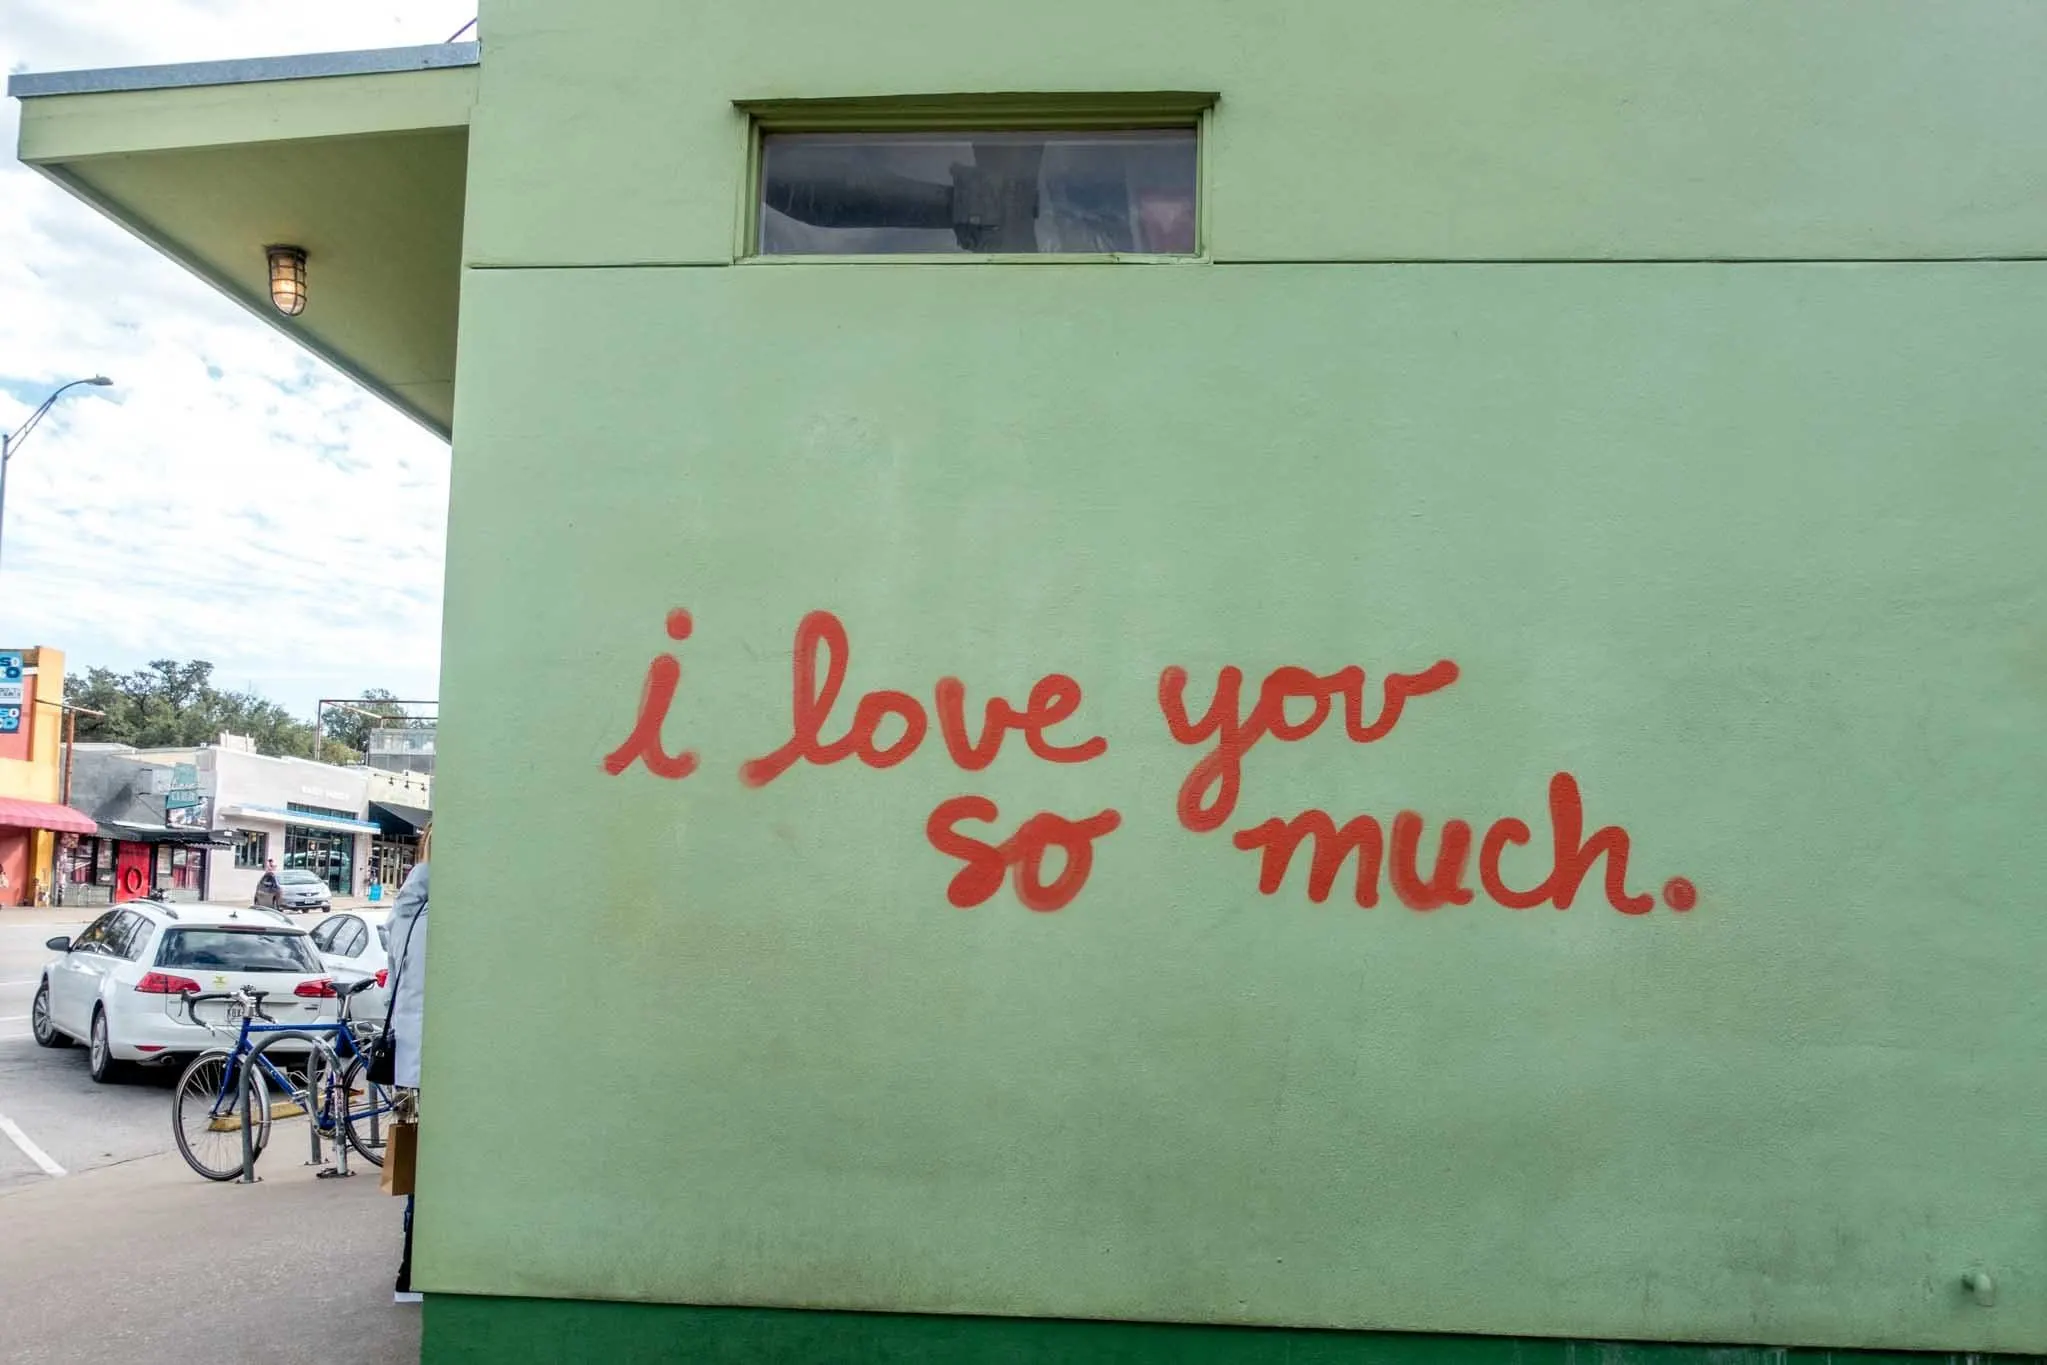 "I love you so much" mural 